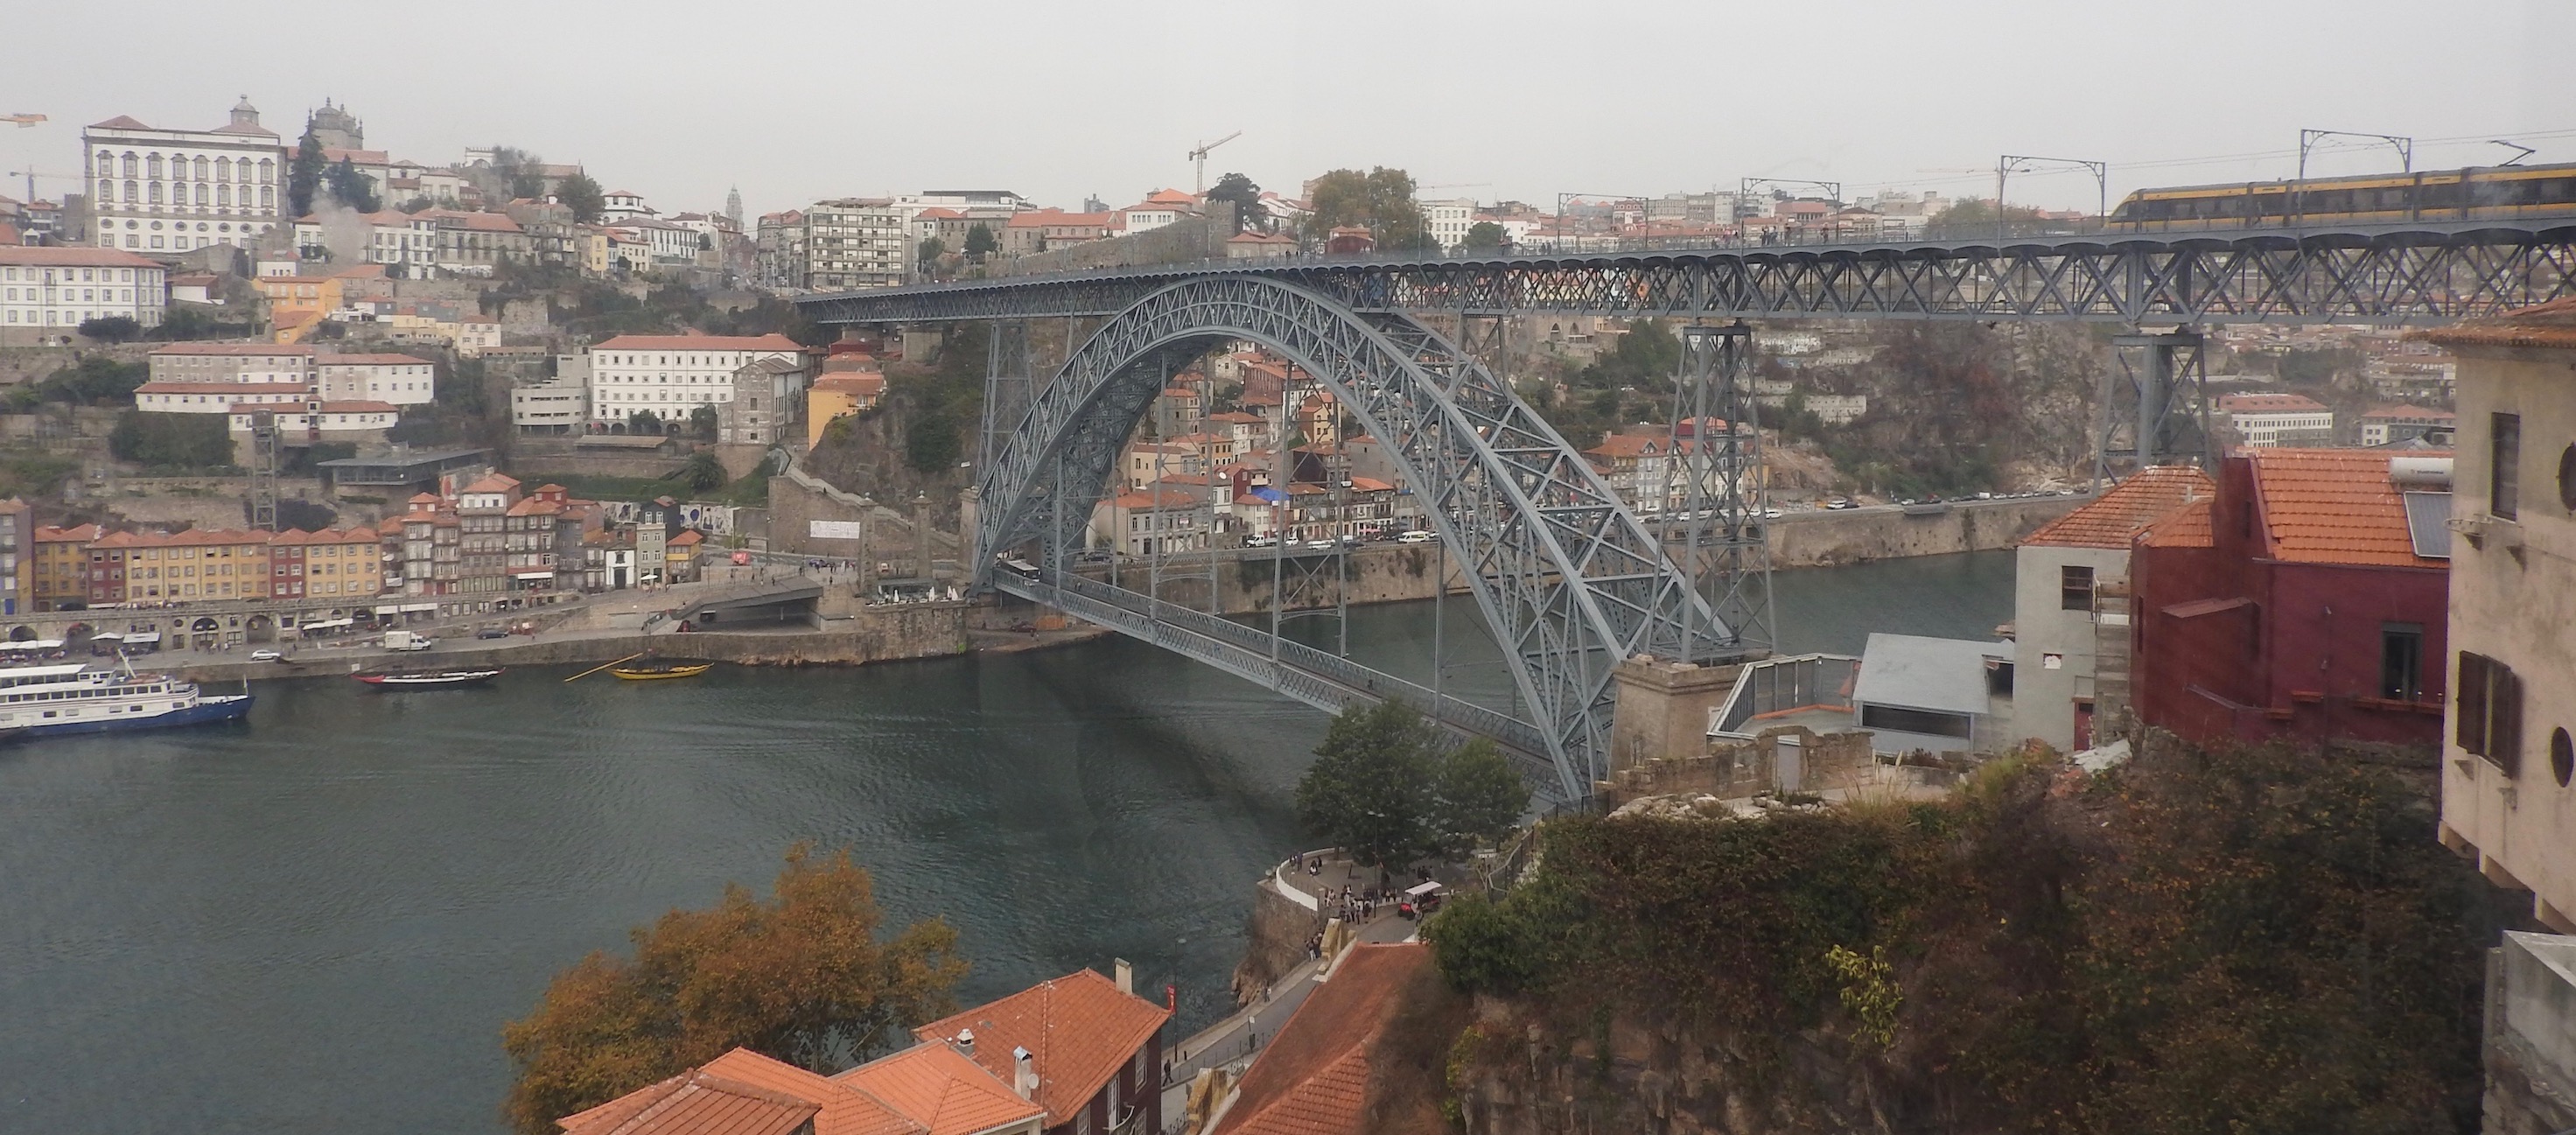 The Bridges of Europe – Part One, Southern Europe